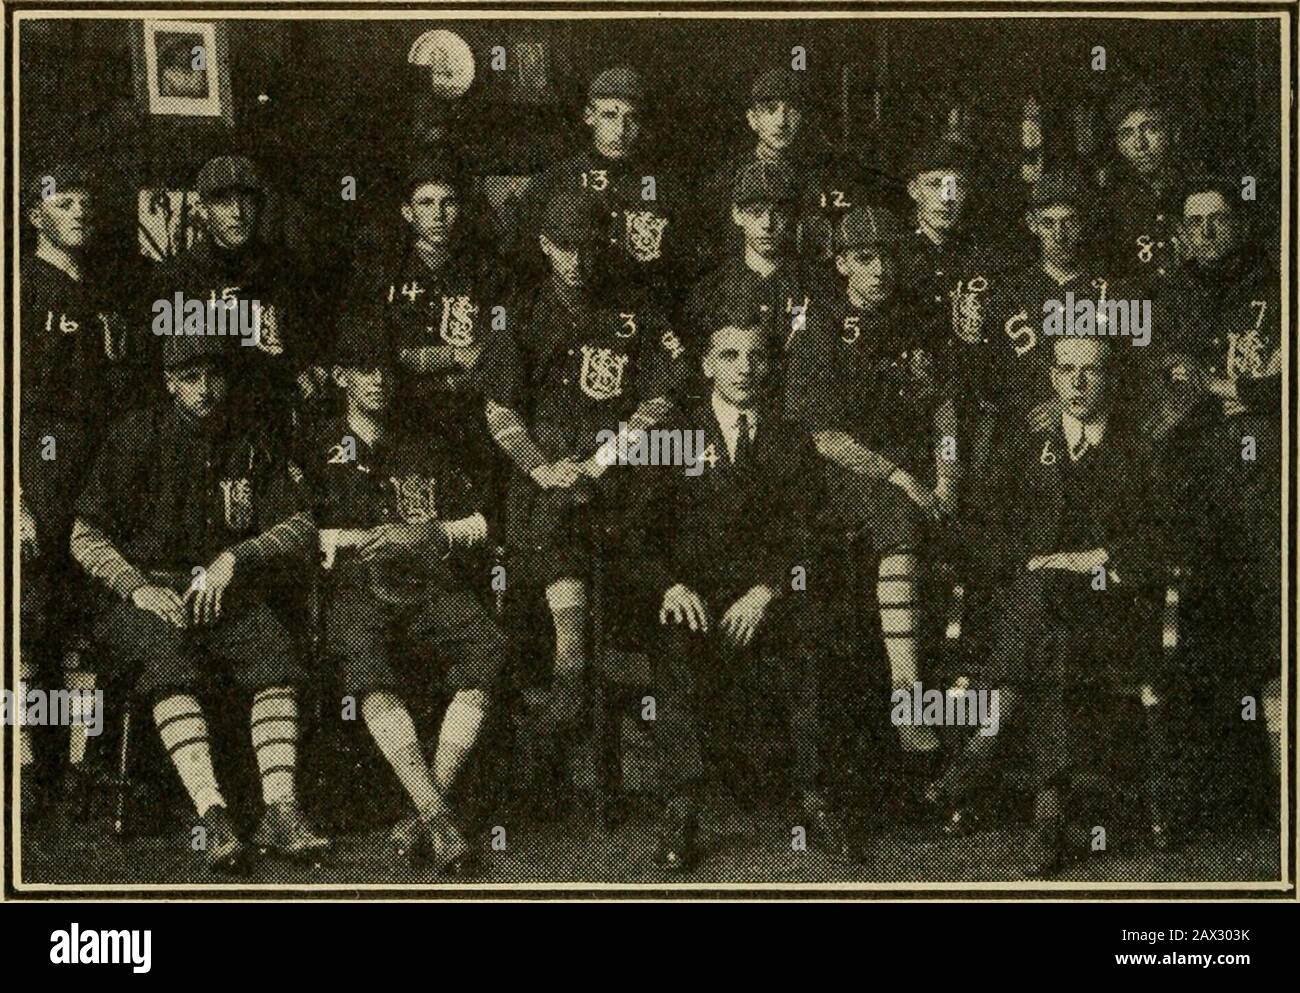 Spalding's official college base ball annual1911- . ITniversity, New York City.—Only two players of Columbiaateam got into the .300 batting class in 1912. Casuso and ONeale. The lead-ing battery was Ulrich, pitcher, and Williams, catcher. The batting andfielding averages follow: BATTING AVERAGES. Names. AB. 00 H. PC. 19 .317 3 .300 4 .2853 .2737 .269 22 .26812 .26619 .26017 .23615 .228 FIELDINGA. E. PC. 1 0 1.000 2 0 1.00012 0 1.000 4 1 .995.33 2 .98621 1 .95941 4 .9.50 9 2 .92830 5 .92614 2 .917 Names. Bailey Sanders Roseff AB. 32 49 IT. 79 91 00 A. E. 4 140 218 4 4 511 213 238 16 2 5 2 3 PC. Stock Photo